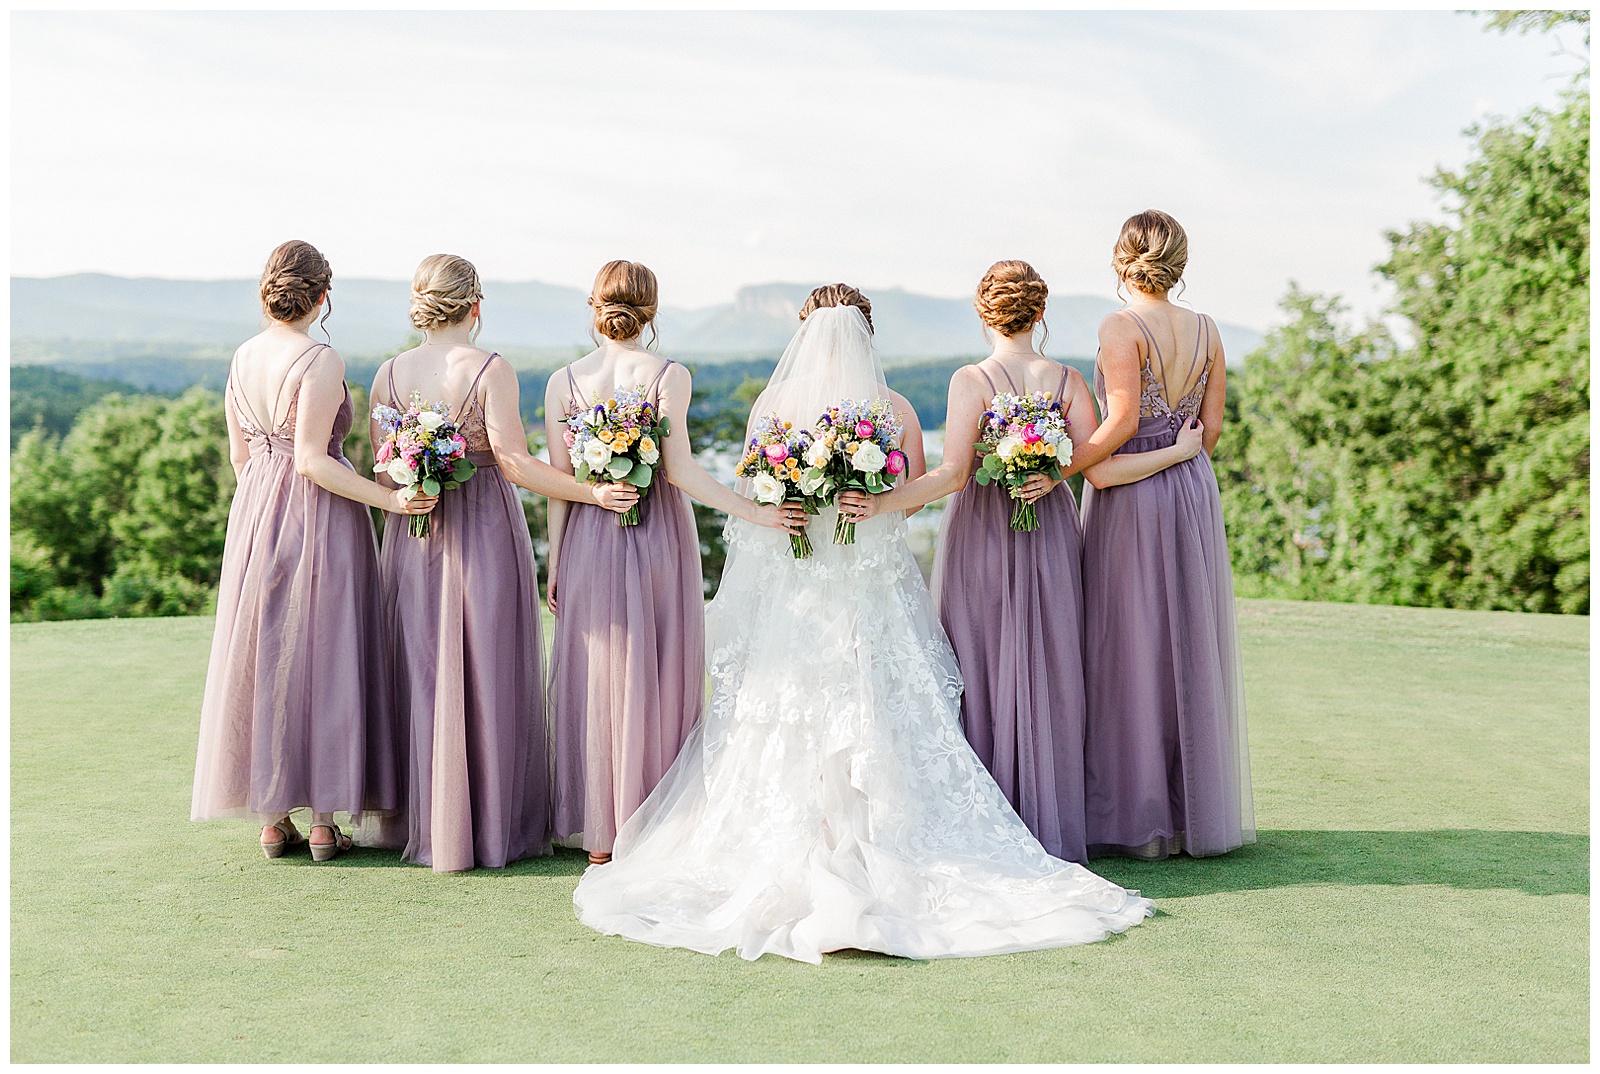 Lavender Purple Bridesmaid Dresses color themed wedding group photo from Outdoorsy Summer Wedding at North Carolina Lakehouse in the Mountains | check out the full wedding at KevynDixonPhoto.com